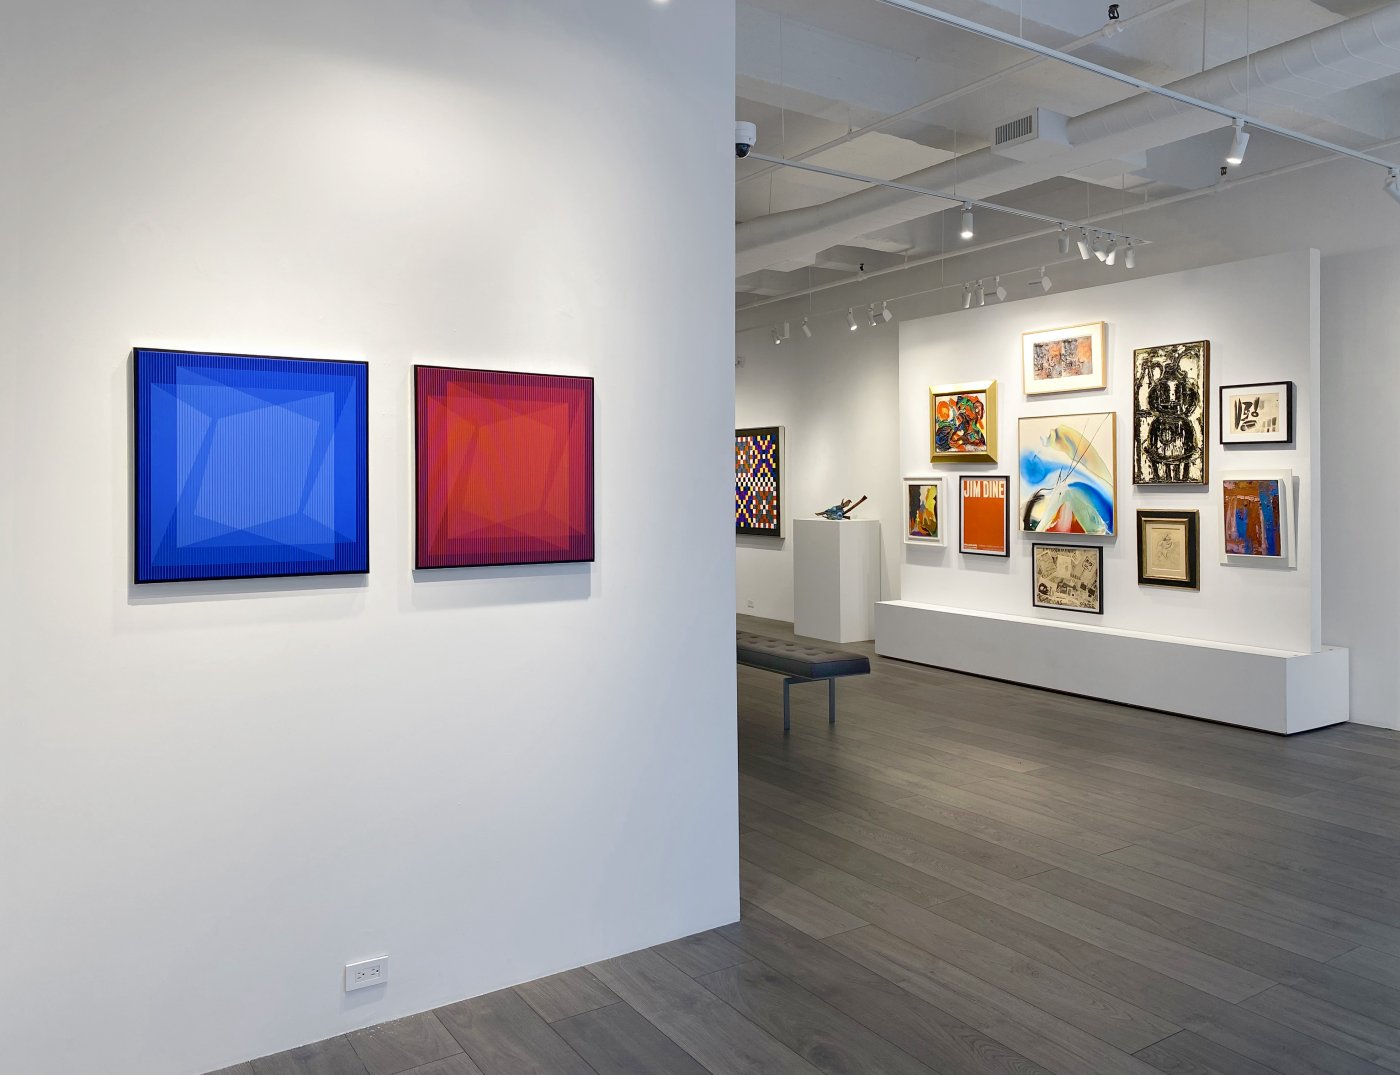 Installation image for Wild and Brilliant: The Martha Jackson Gallery and Post-War Art, at Hollis Taggart